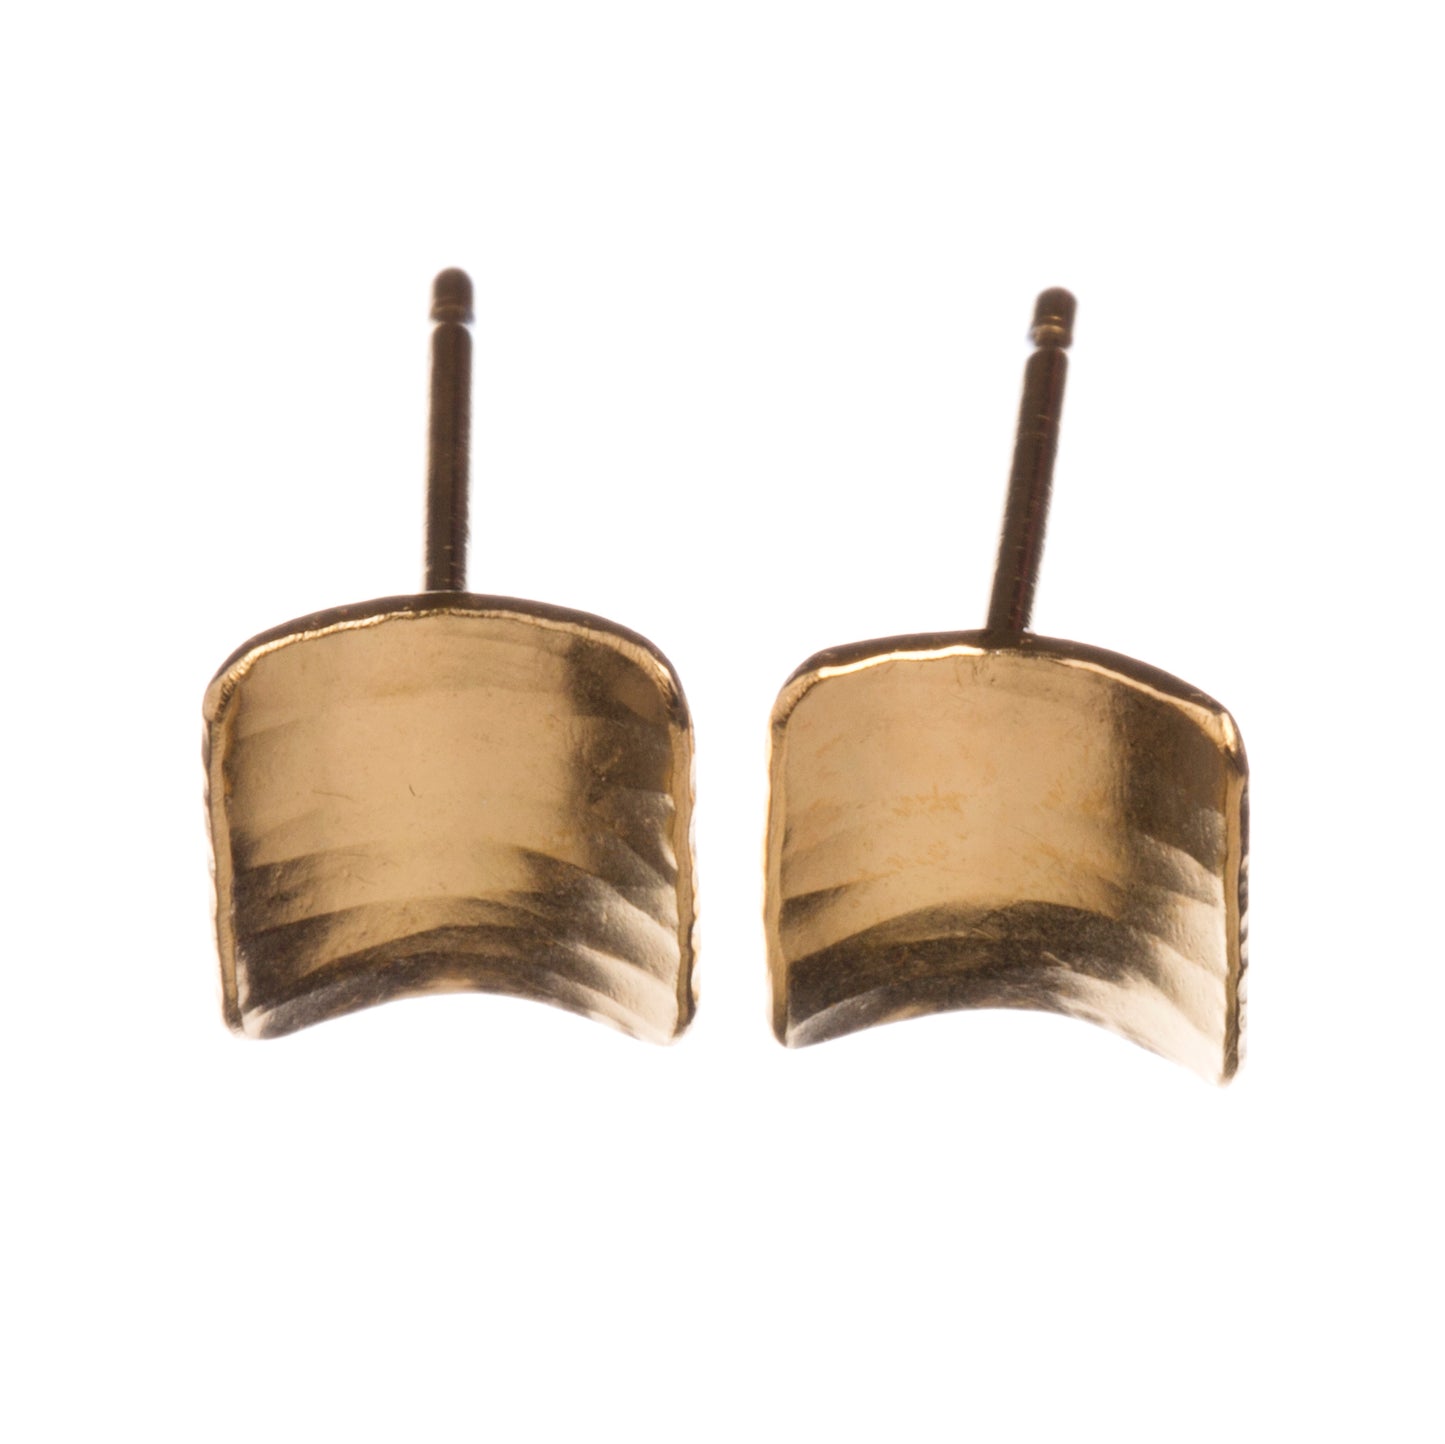 A pair of square silver earrings, studs, gold plated, with a subtle curve, a hammered texture and burnished edges.